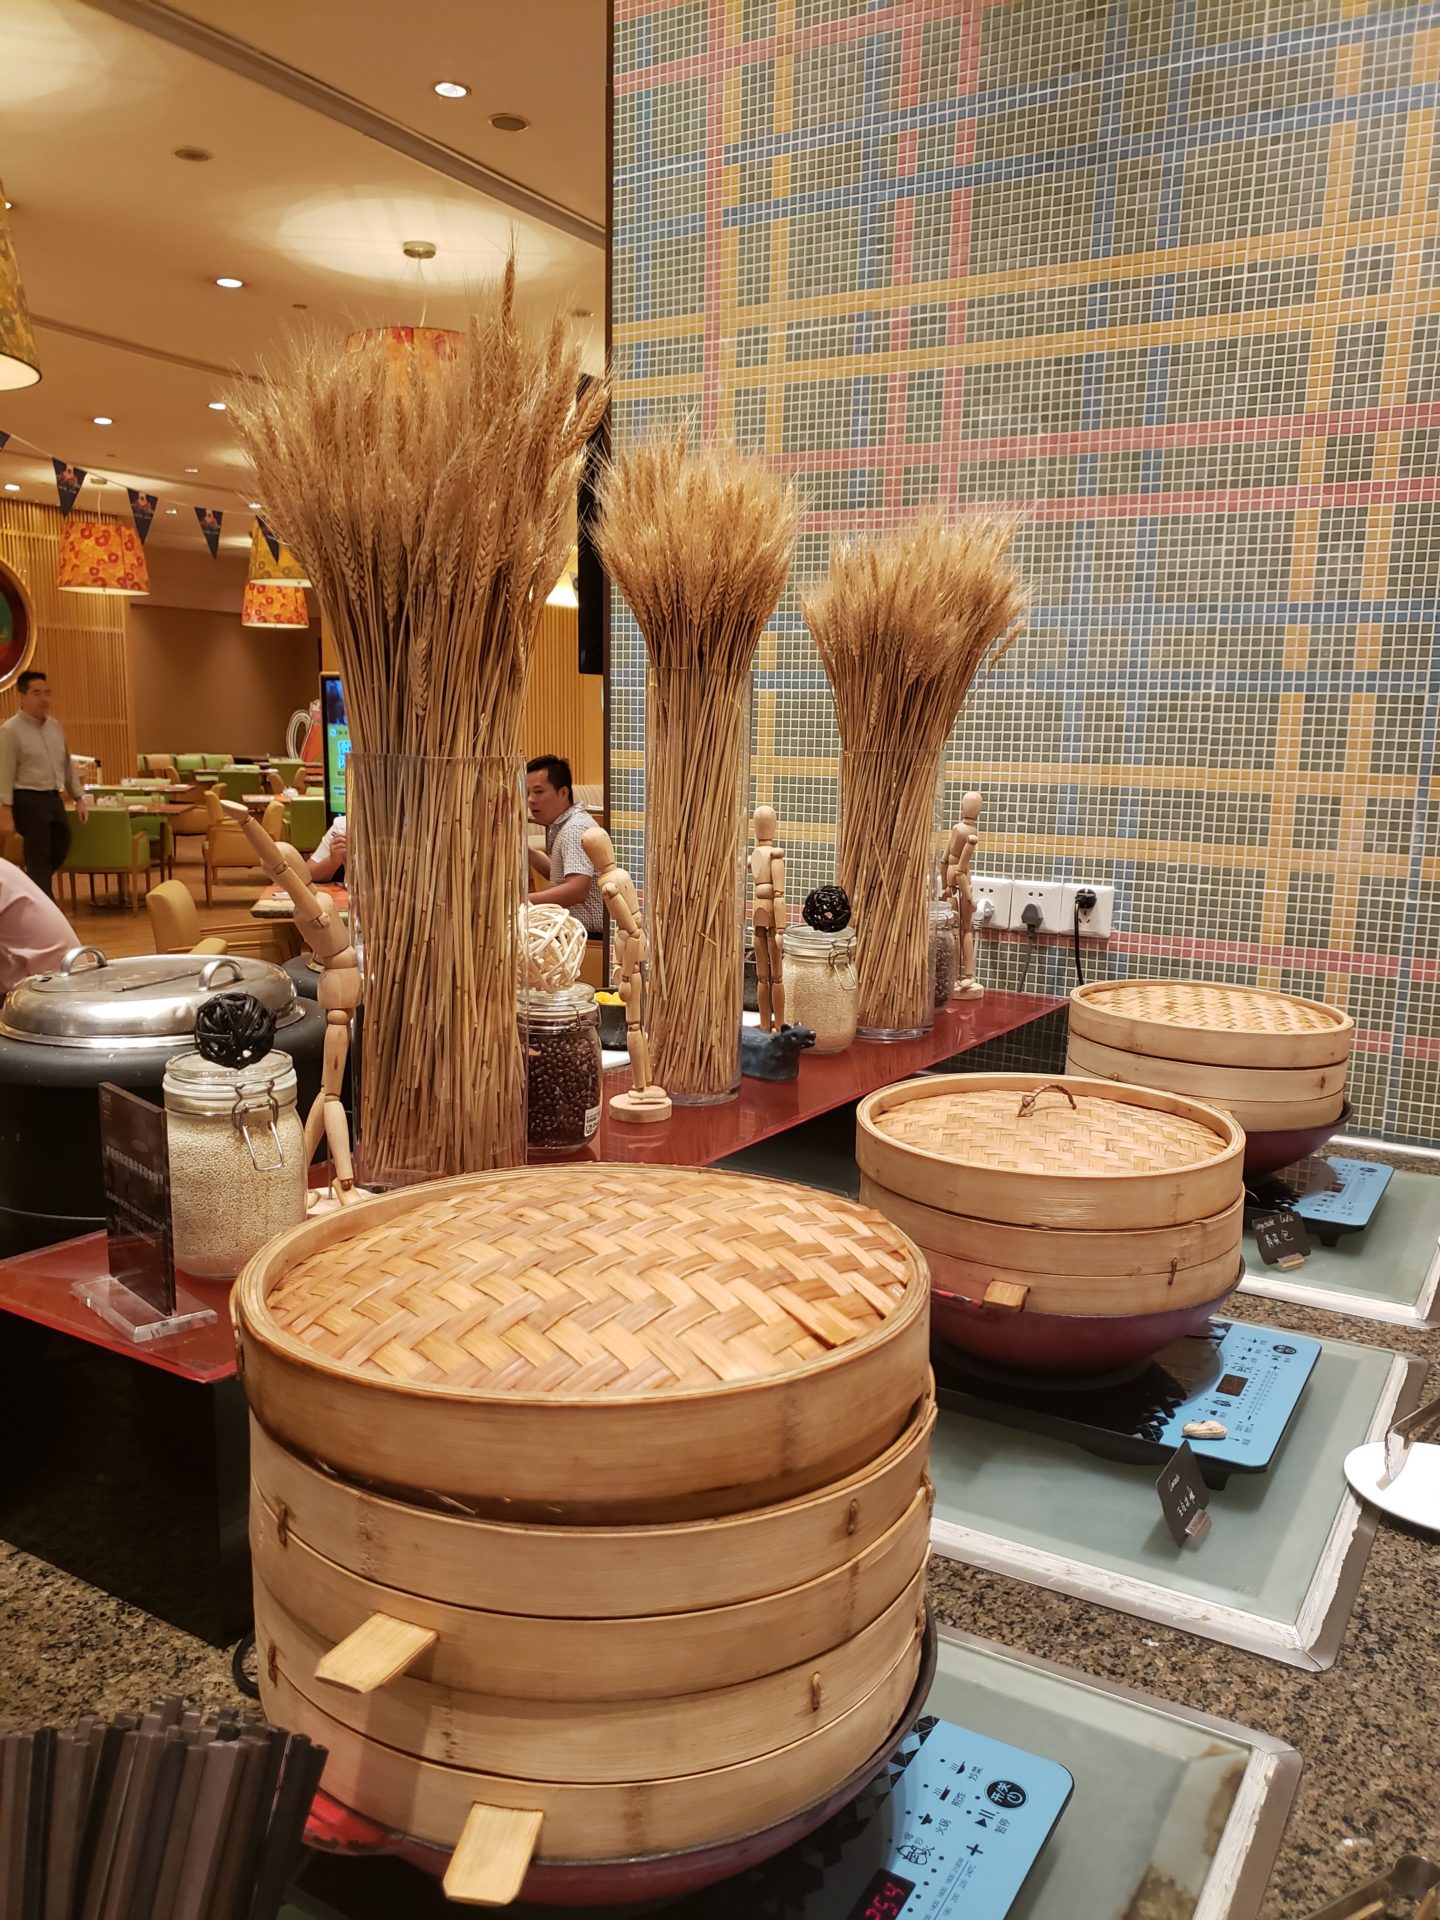 a group of baskets of wheat